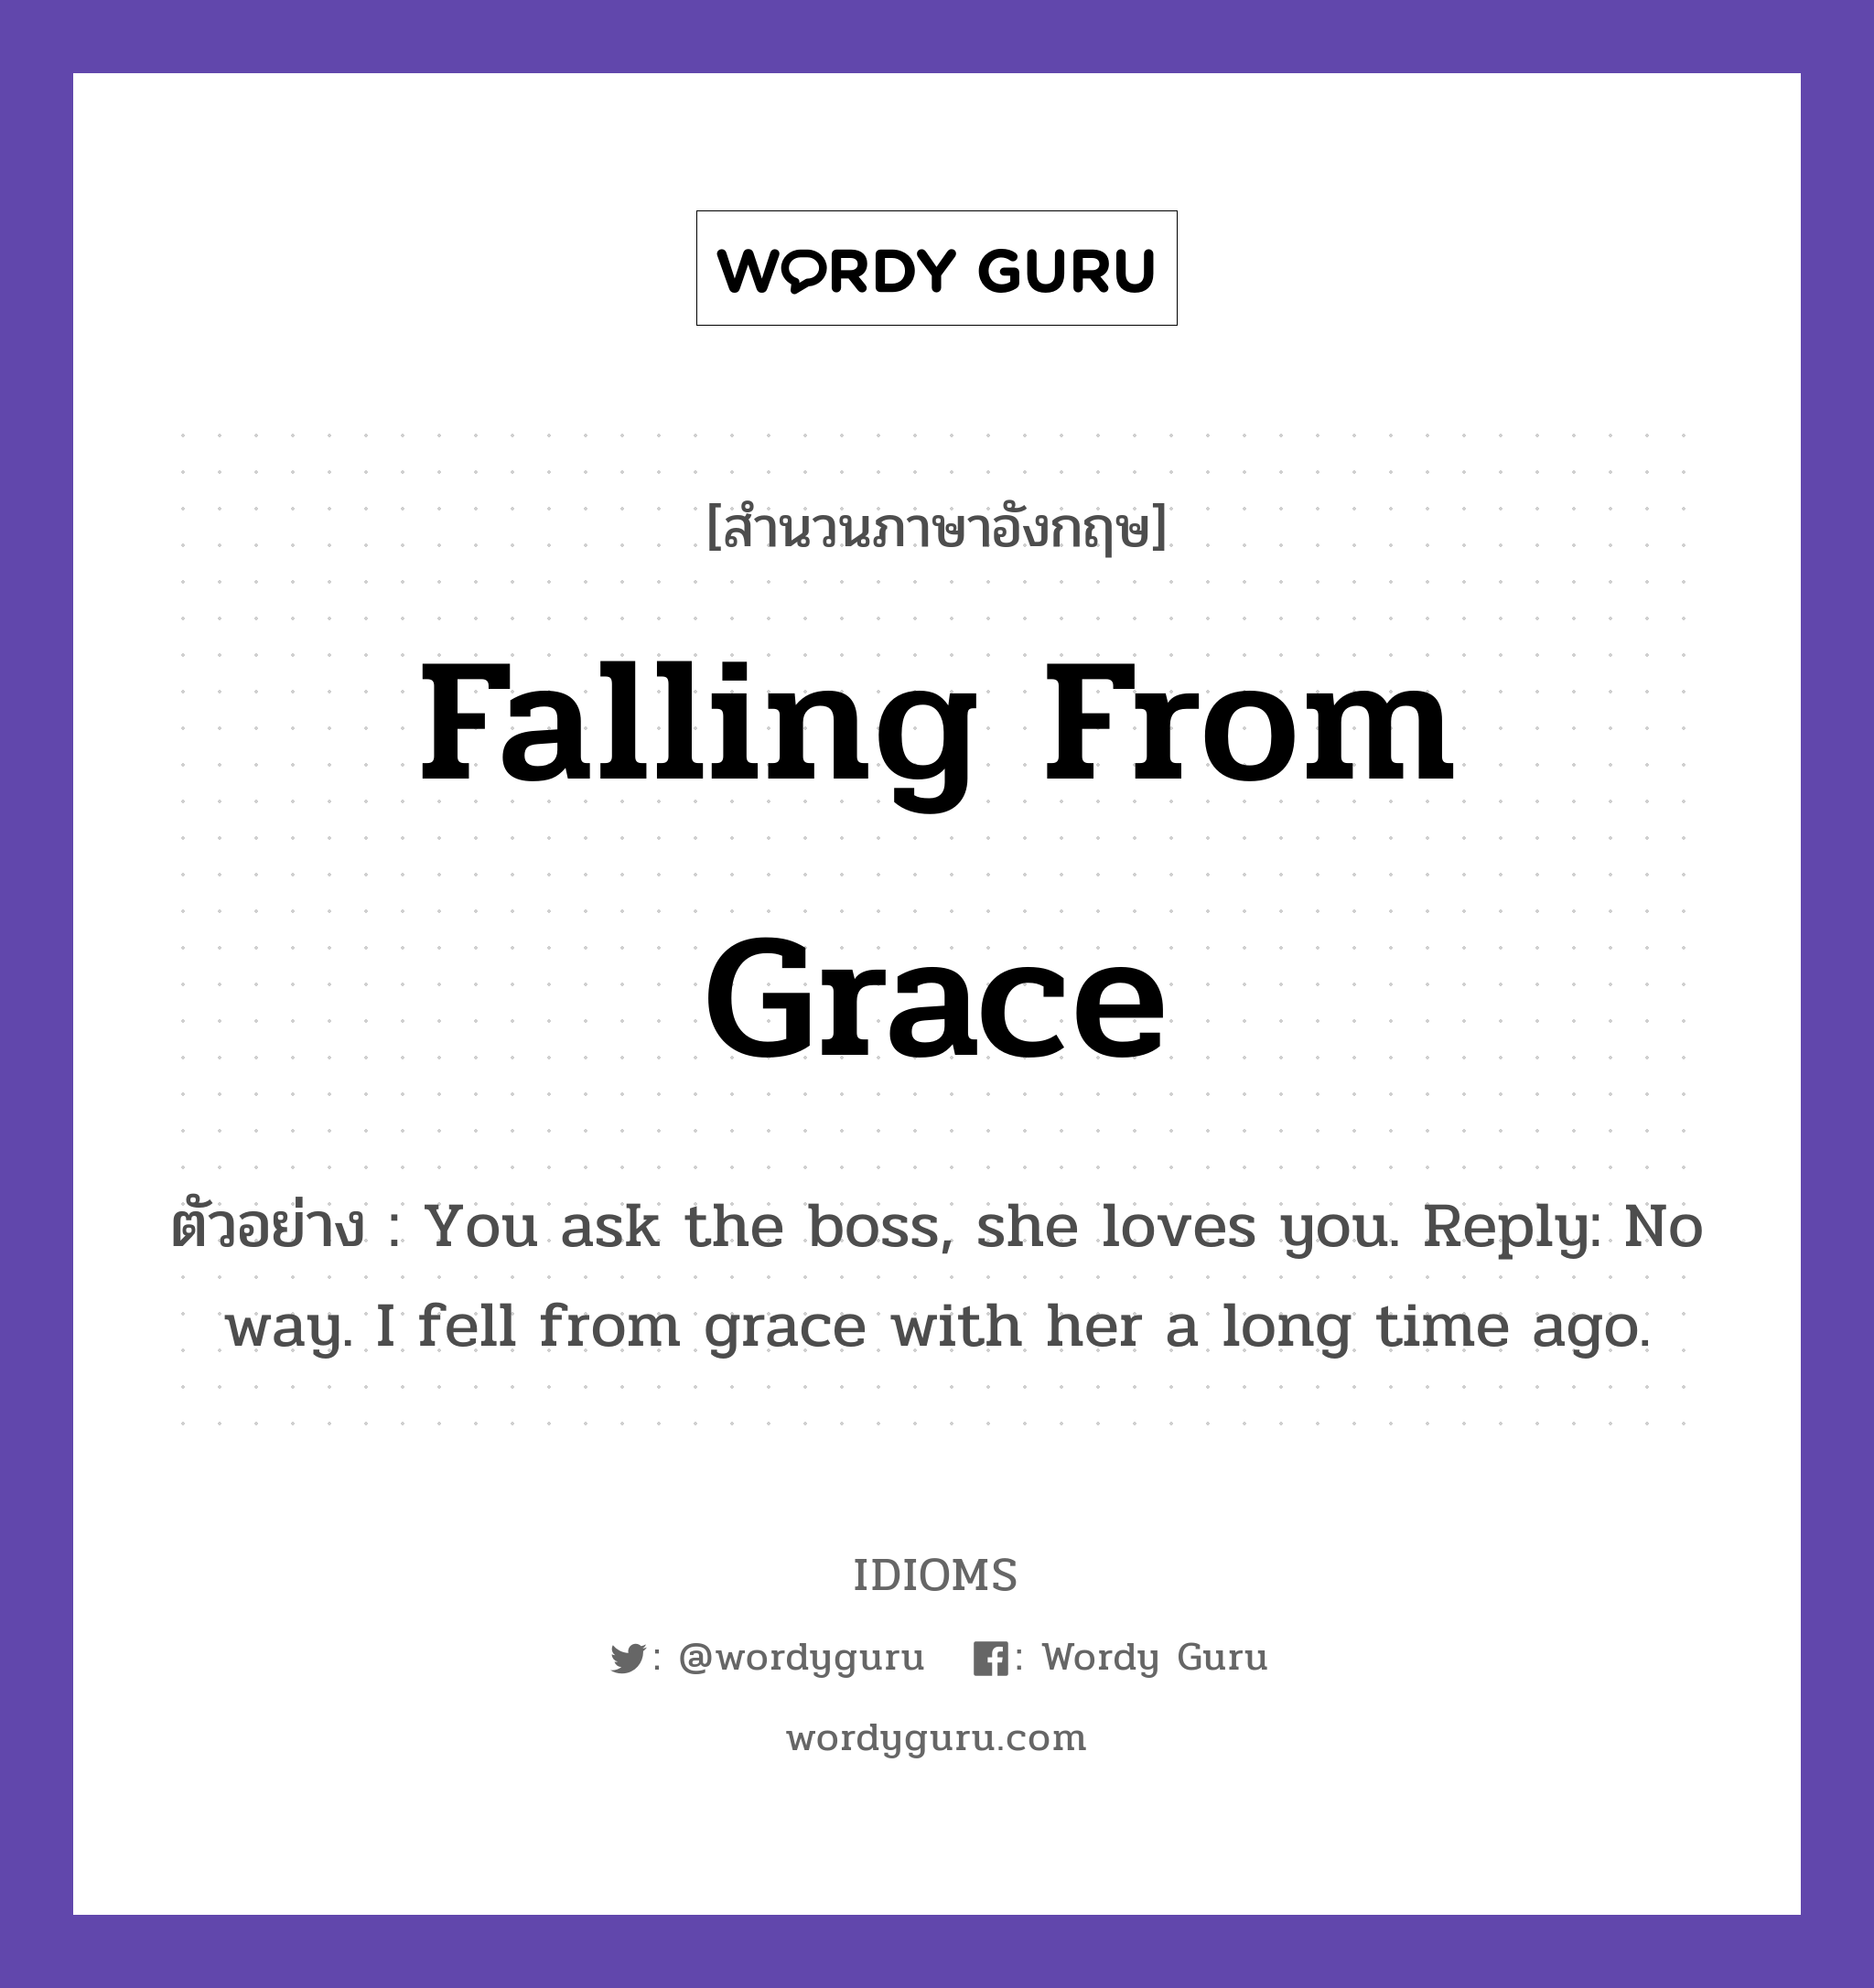 Falling From Grace แปลว่า?, สำนวนภาษาอังกฤษ Falling From Grace ตัวอย่าง You ask the boss, she loves you. Reply: No way. I fell from grace with her a long time ago.